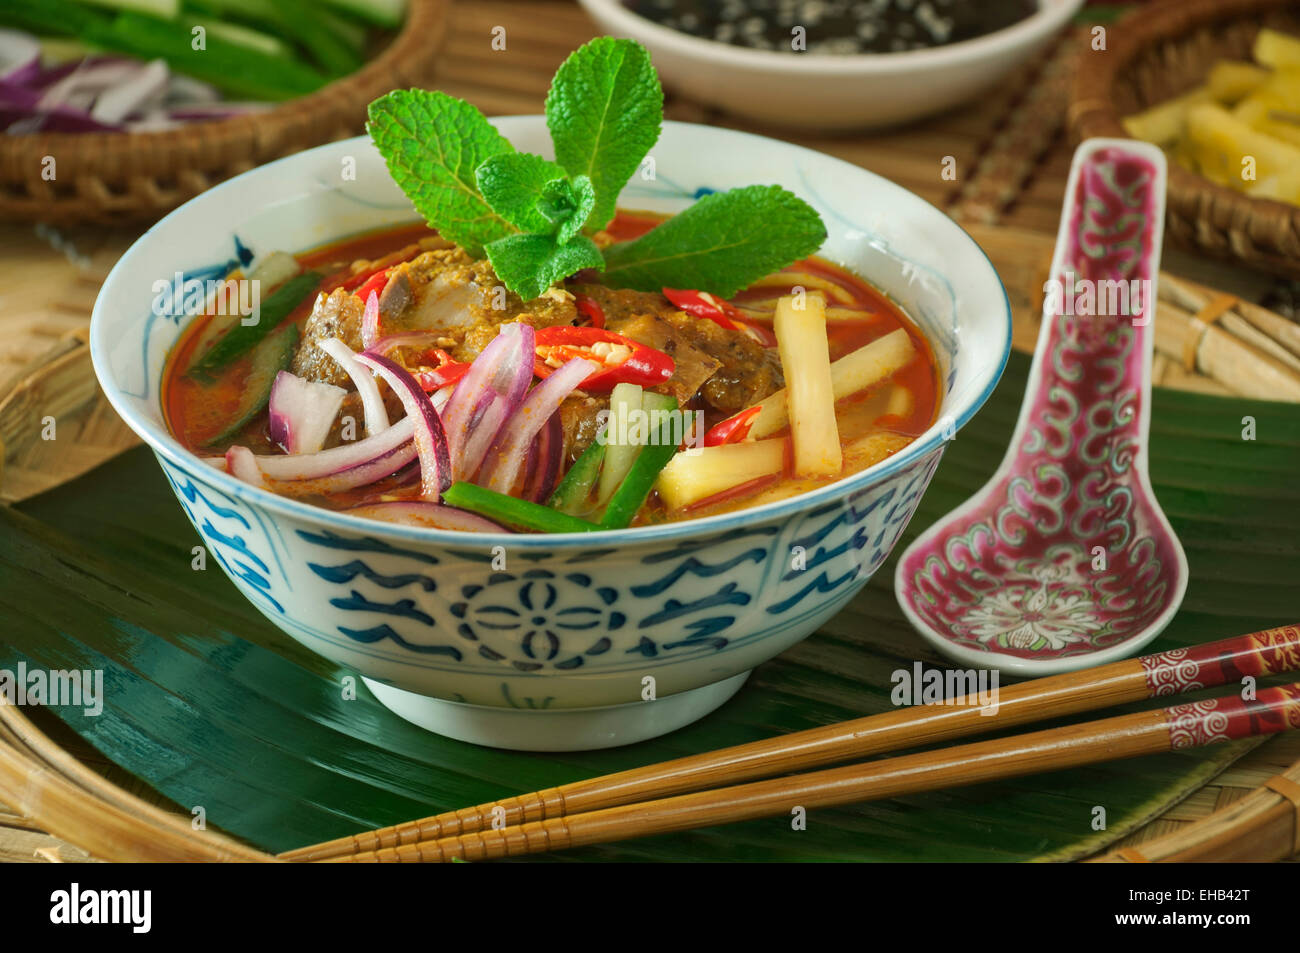 Assam laksa. Spicy noodle soup Malaysia Food Stock Photo